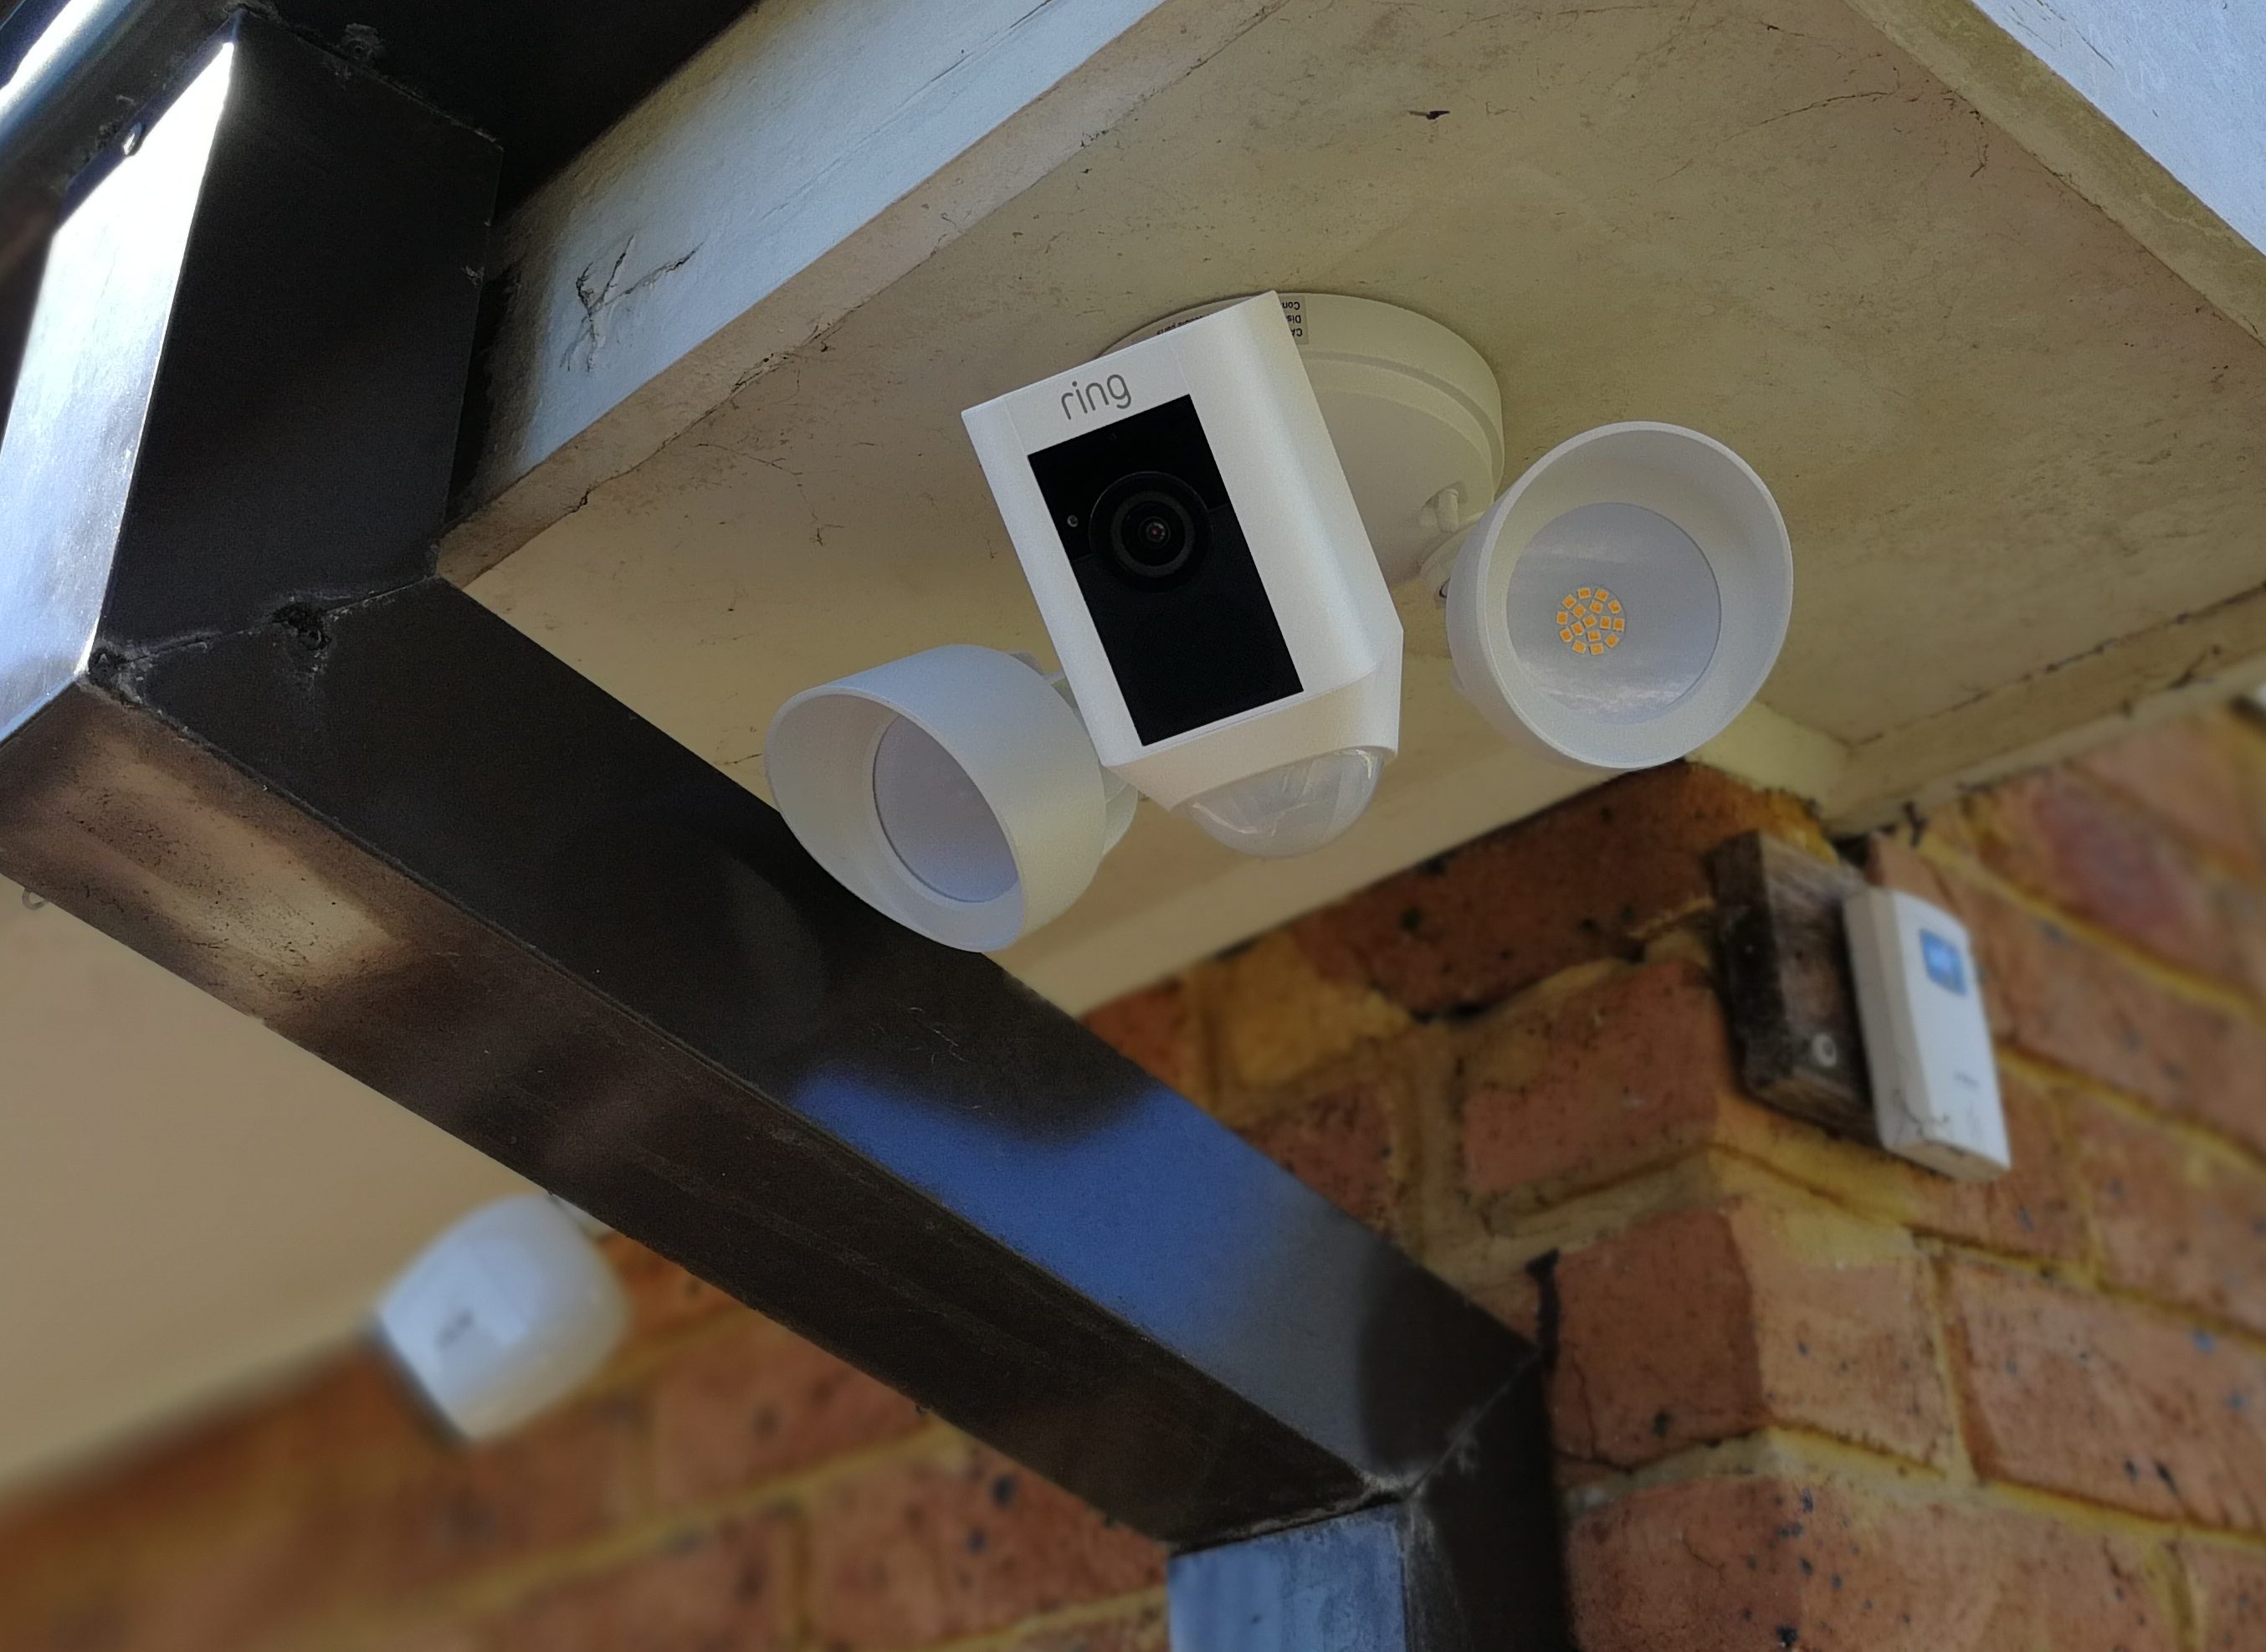 Ring Floodlight Cam & Doorbell 2 REVIEW - added coverage and quality » EFTM